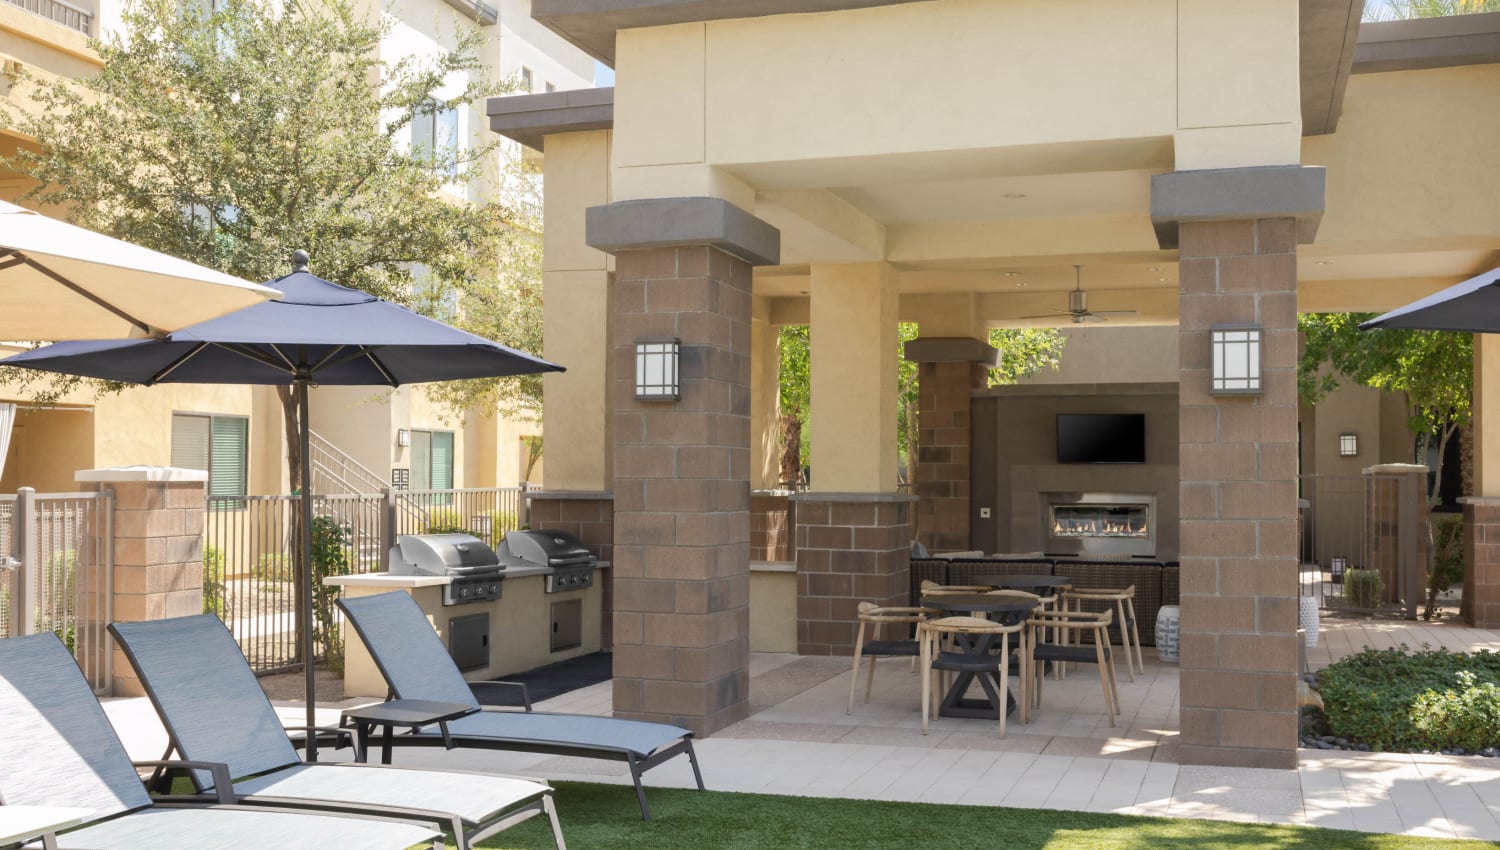 Barbecue and lounge chairs poolside at Cadia Crossing in Gilbert, Arizona